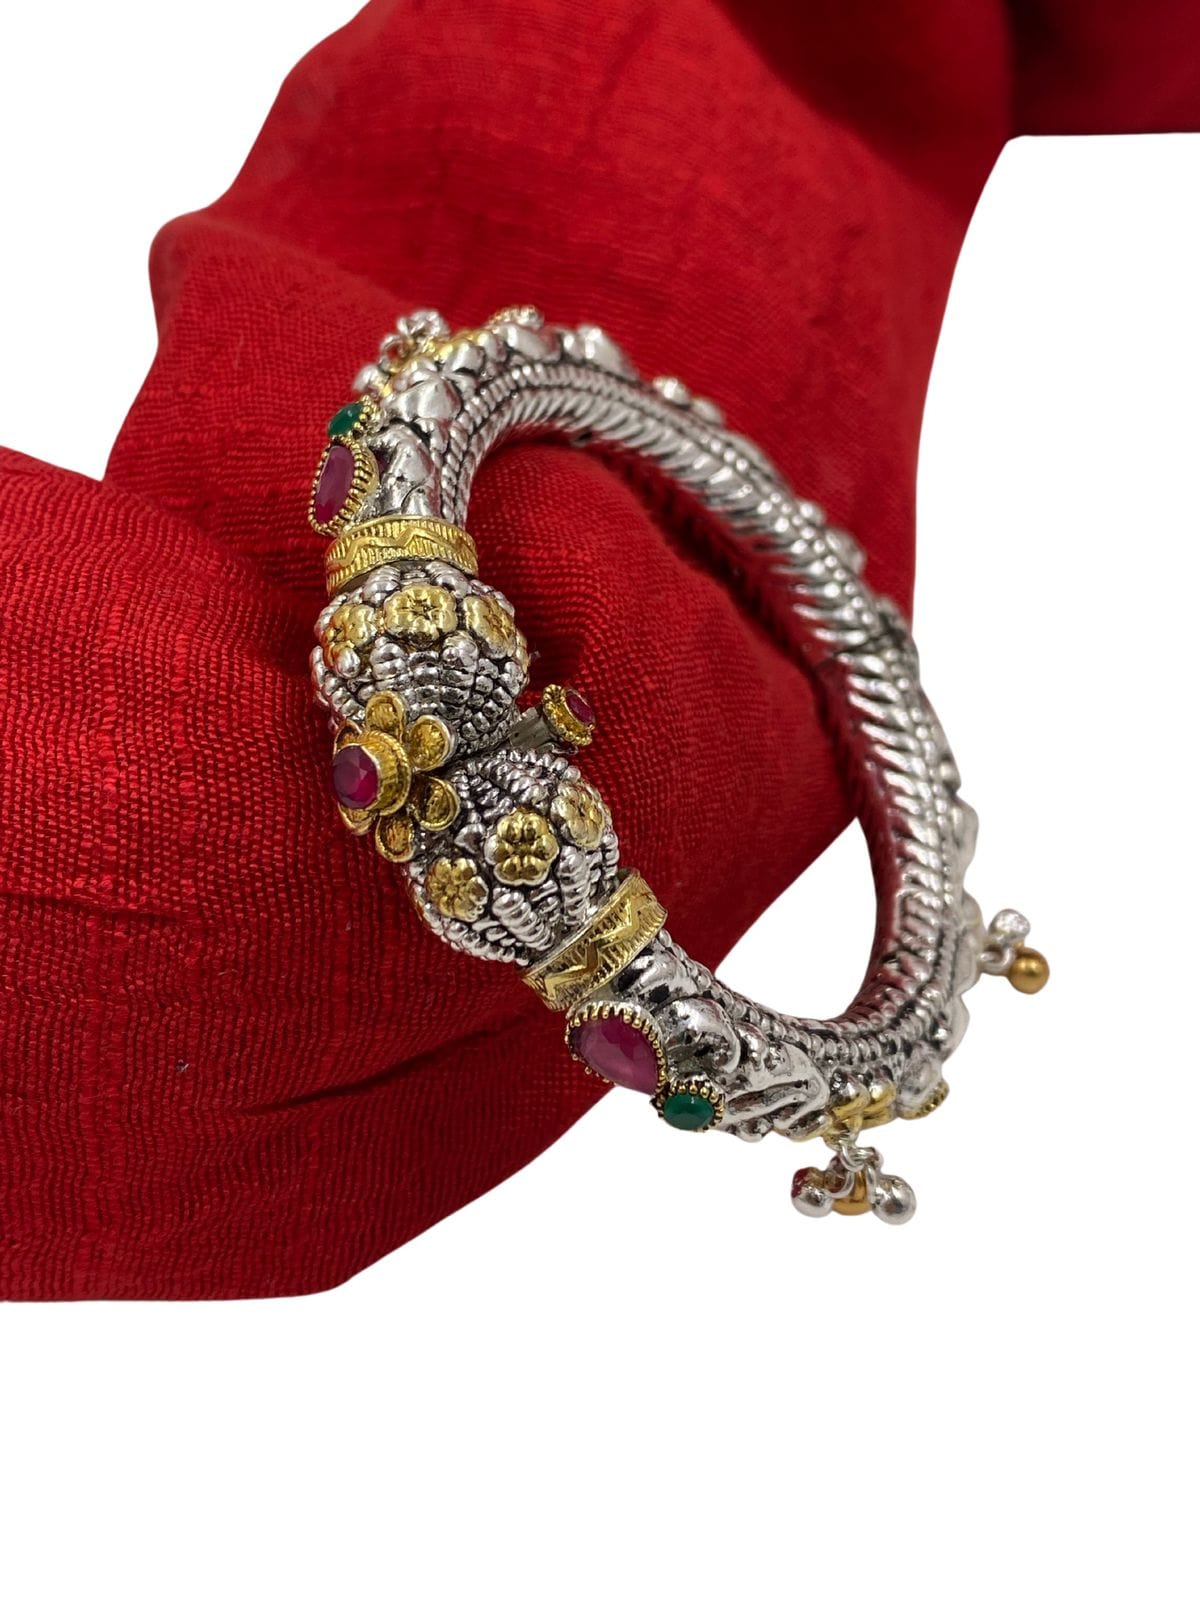 Buy Silver Shine Silver Plated Unique Punjabi Kada Bangle Bracelet For Boys  and Mens Online at Low Prices in India  Paytmmallcom